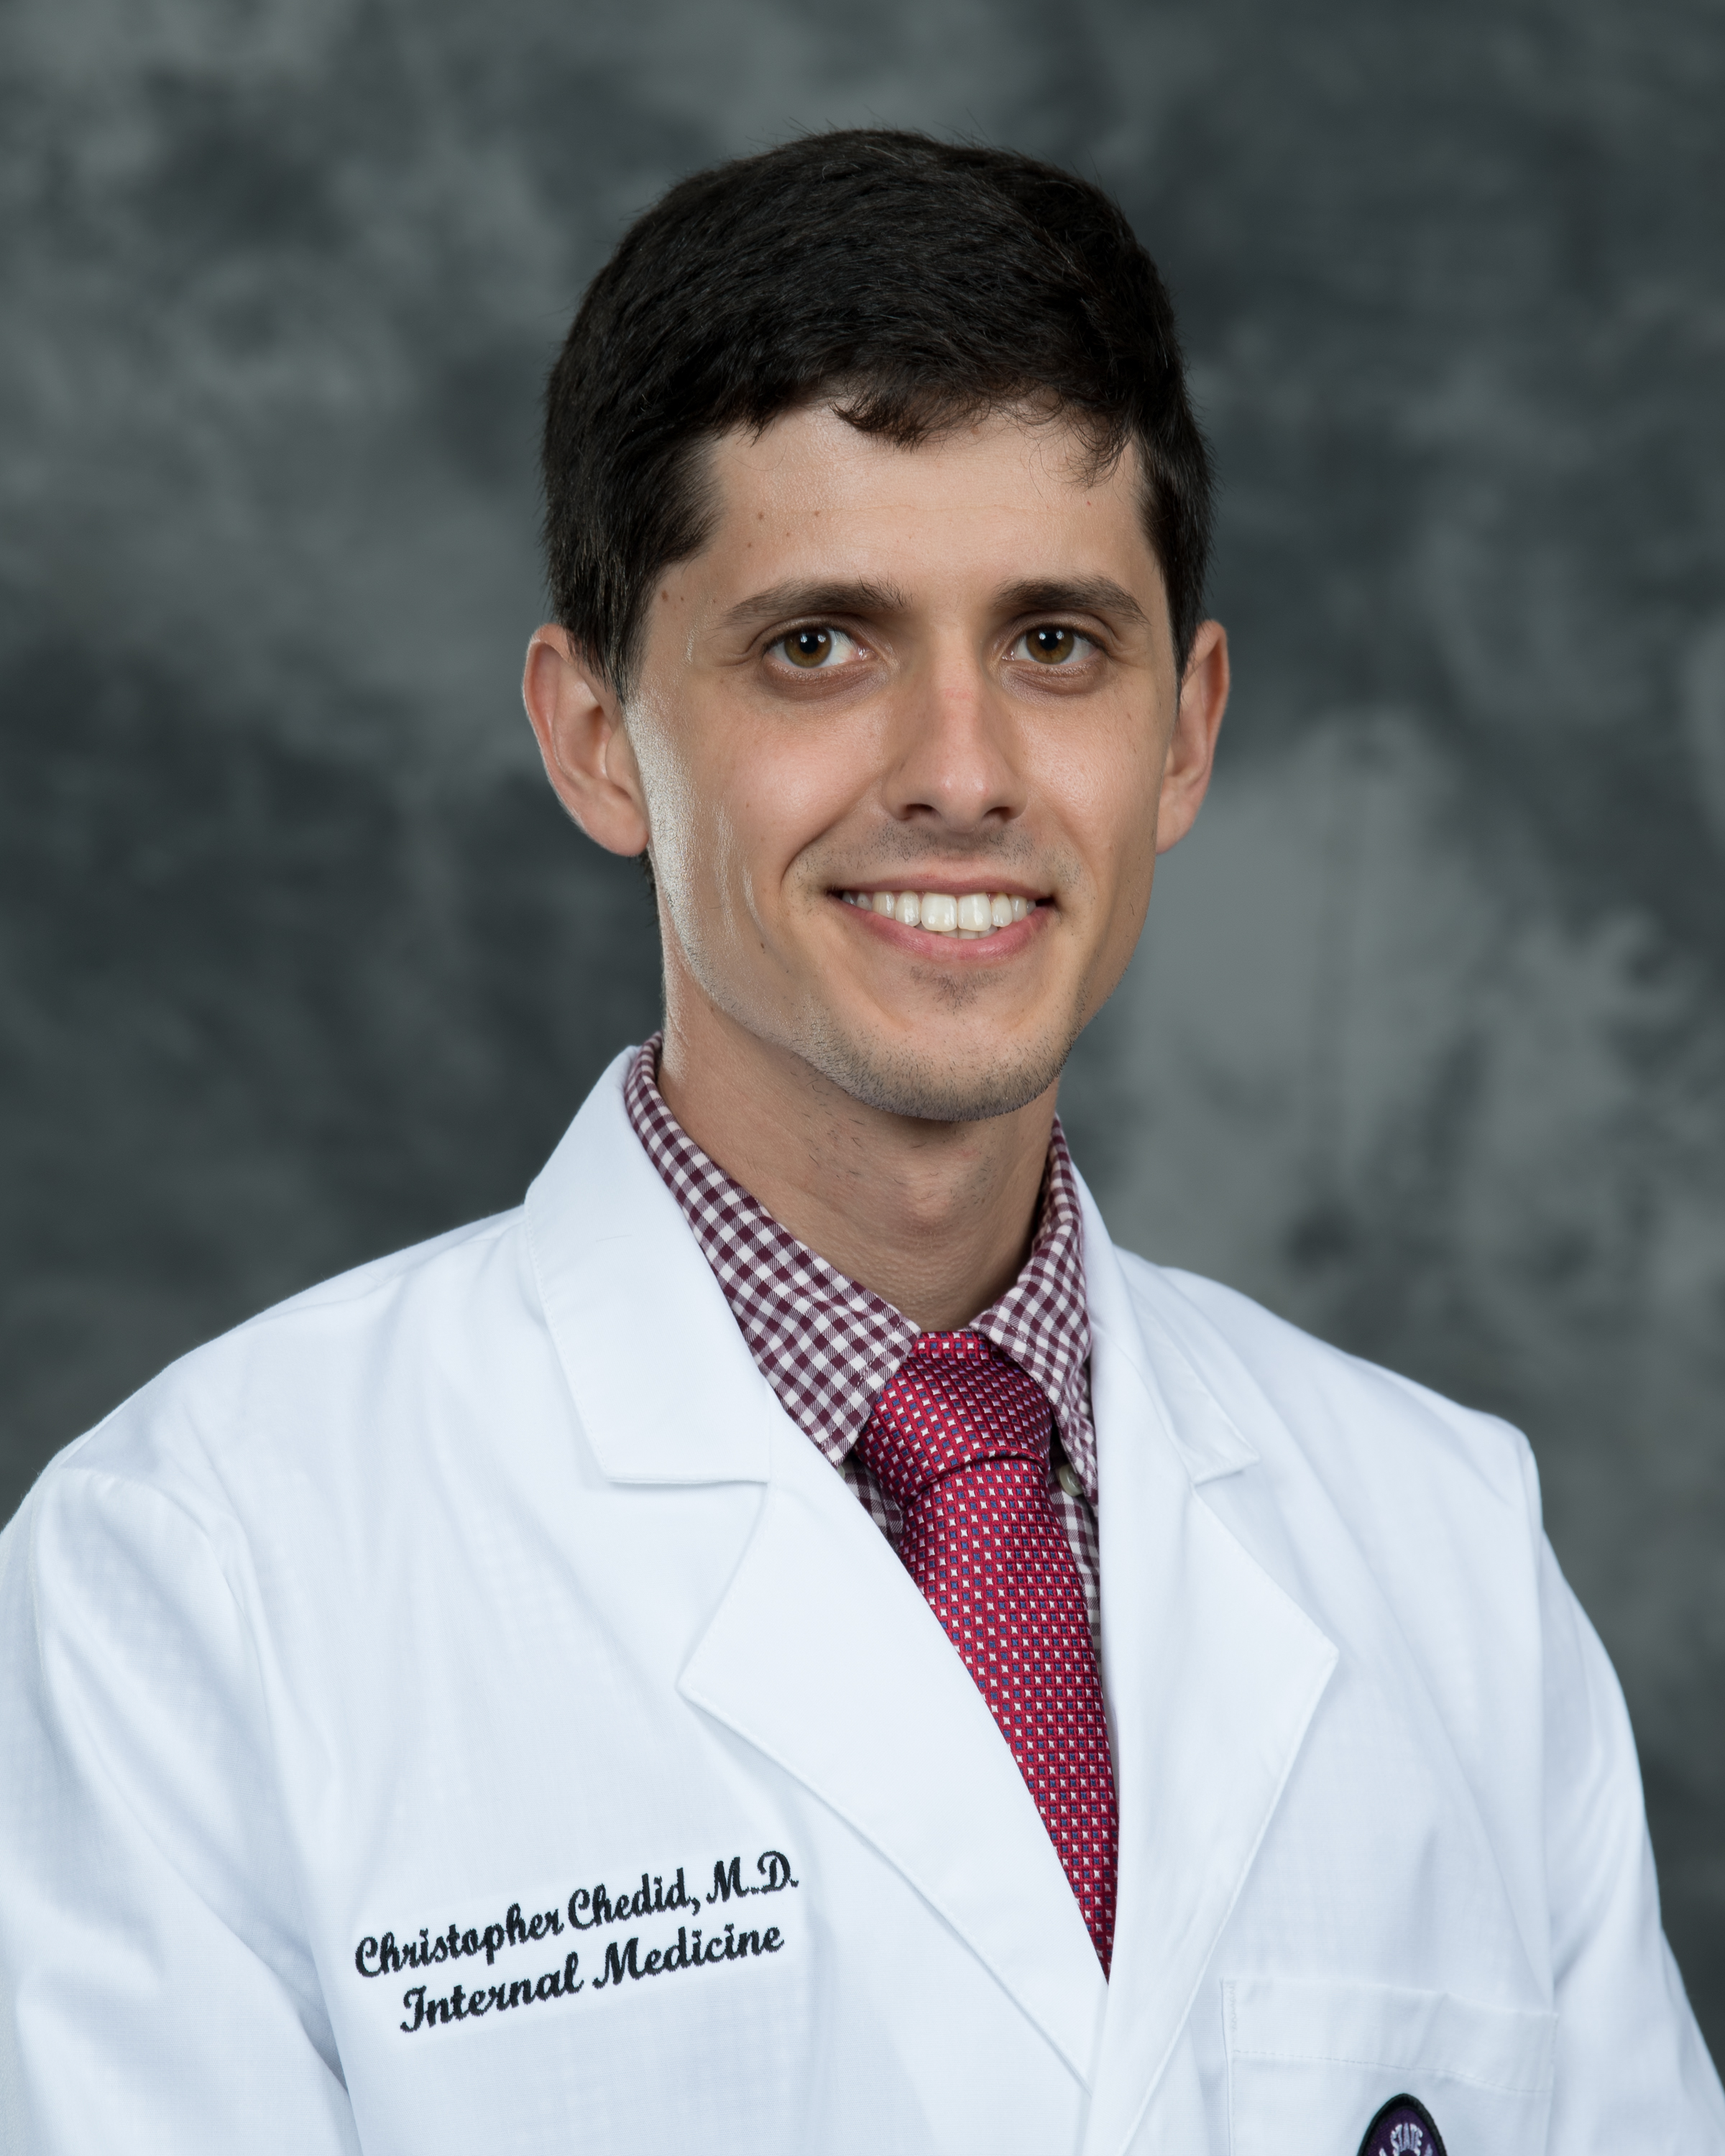 Christopher Chedid, M.D.